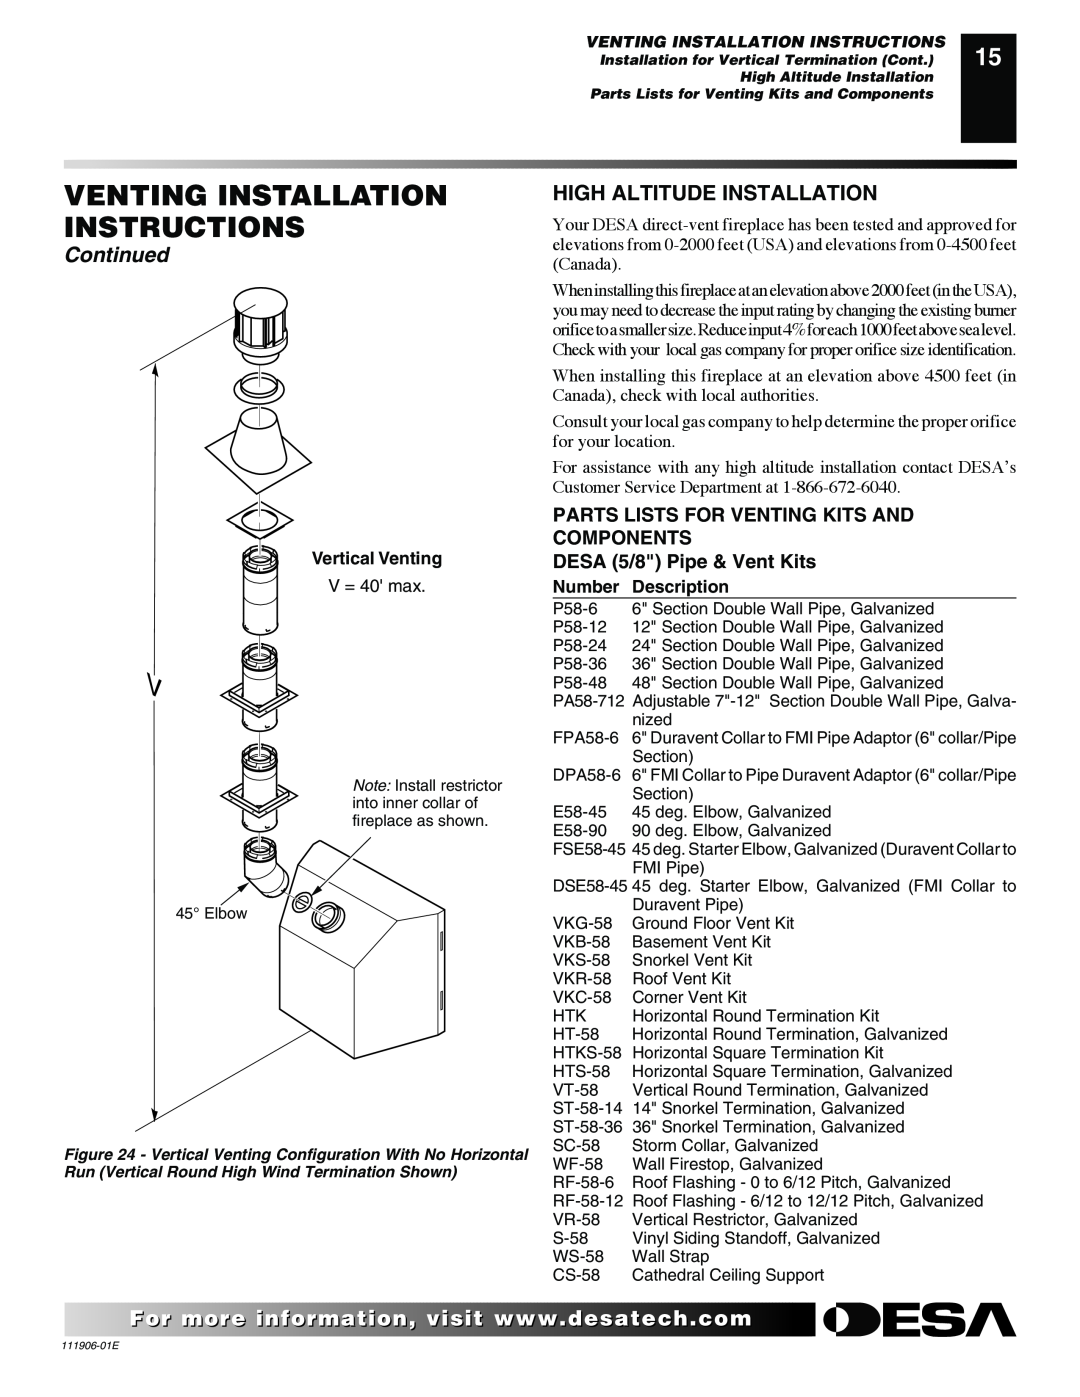 Desa CHDV42NR-B, V42P-A, V42N-A, VV42NB(1) High Altitude Installation, Venting Installation Instructions, Continued 